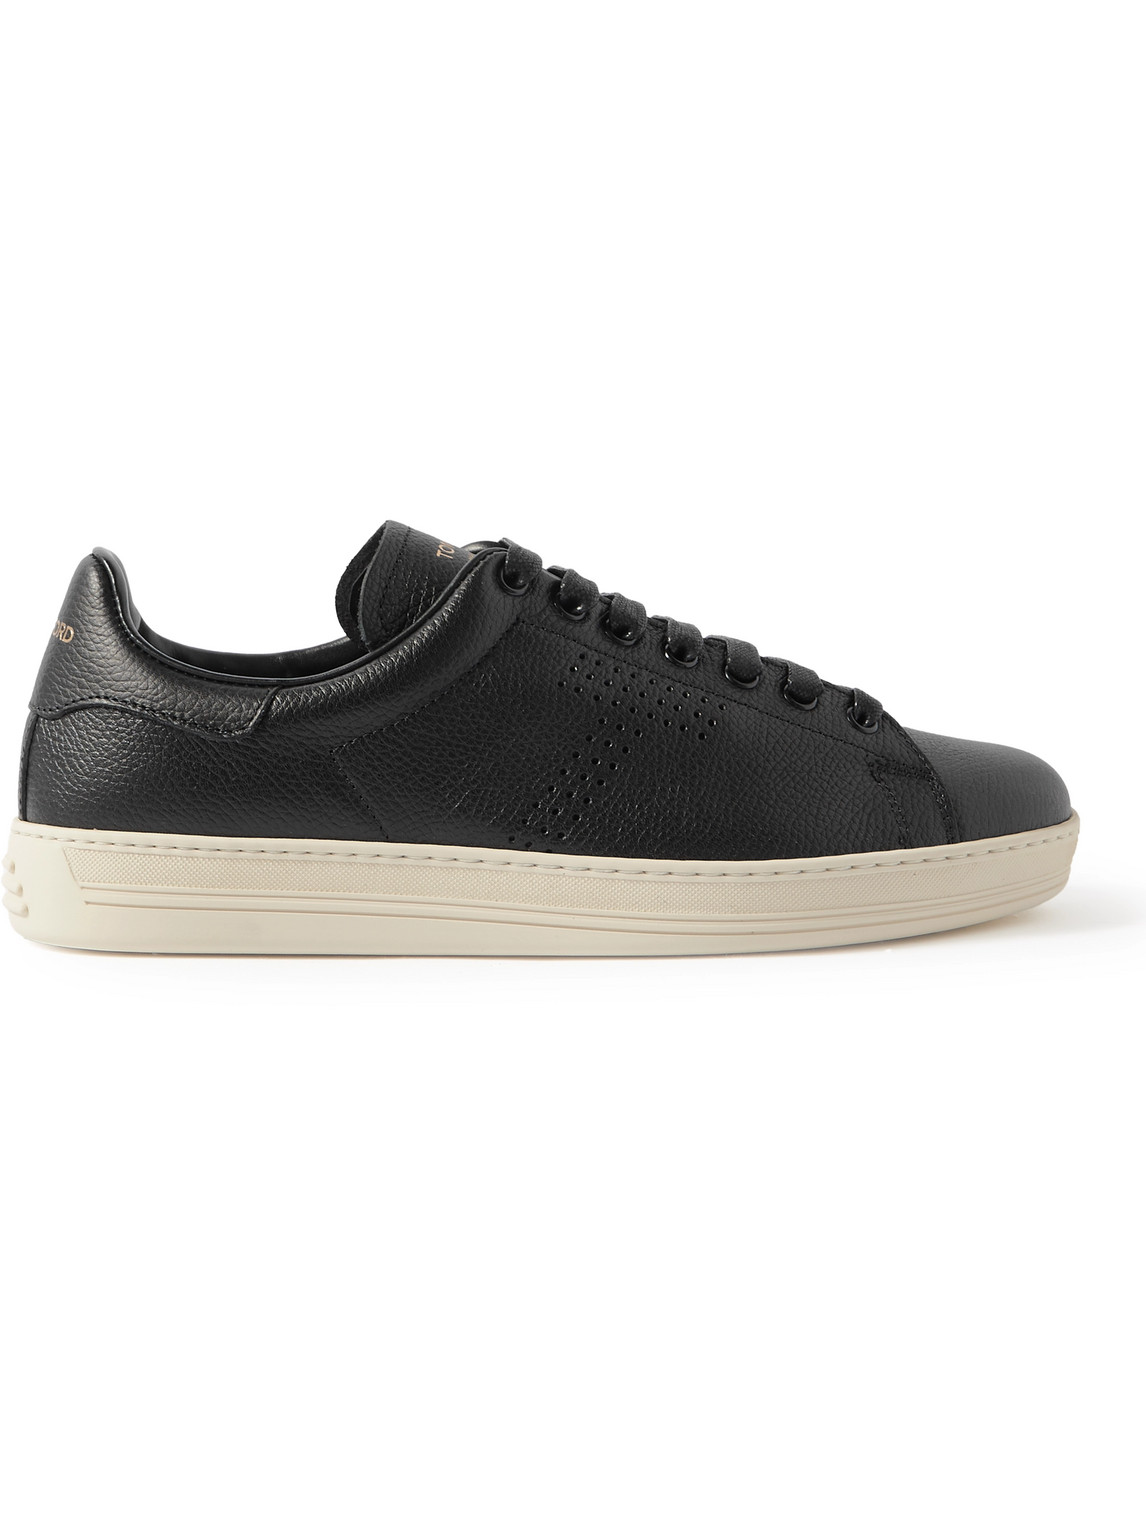 TOM FORD WARWICK PERFORATED FULL-GRAIN LEATHER SNEAKERS